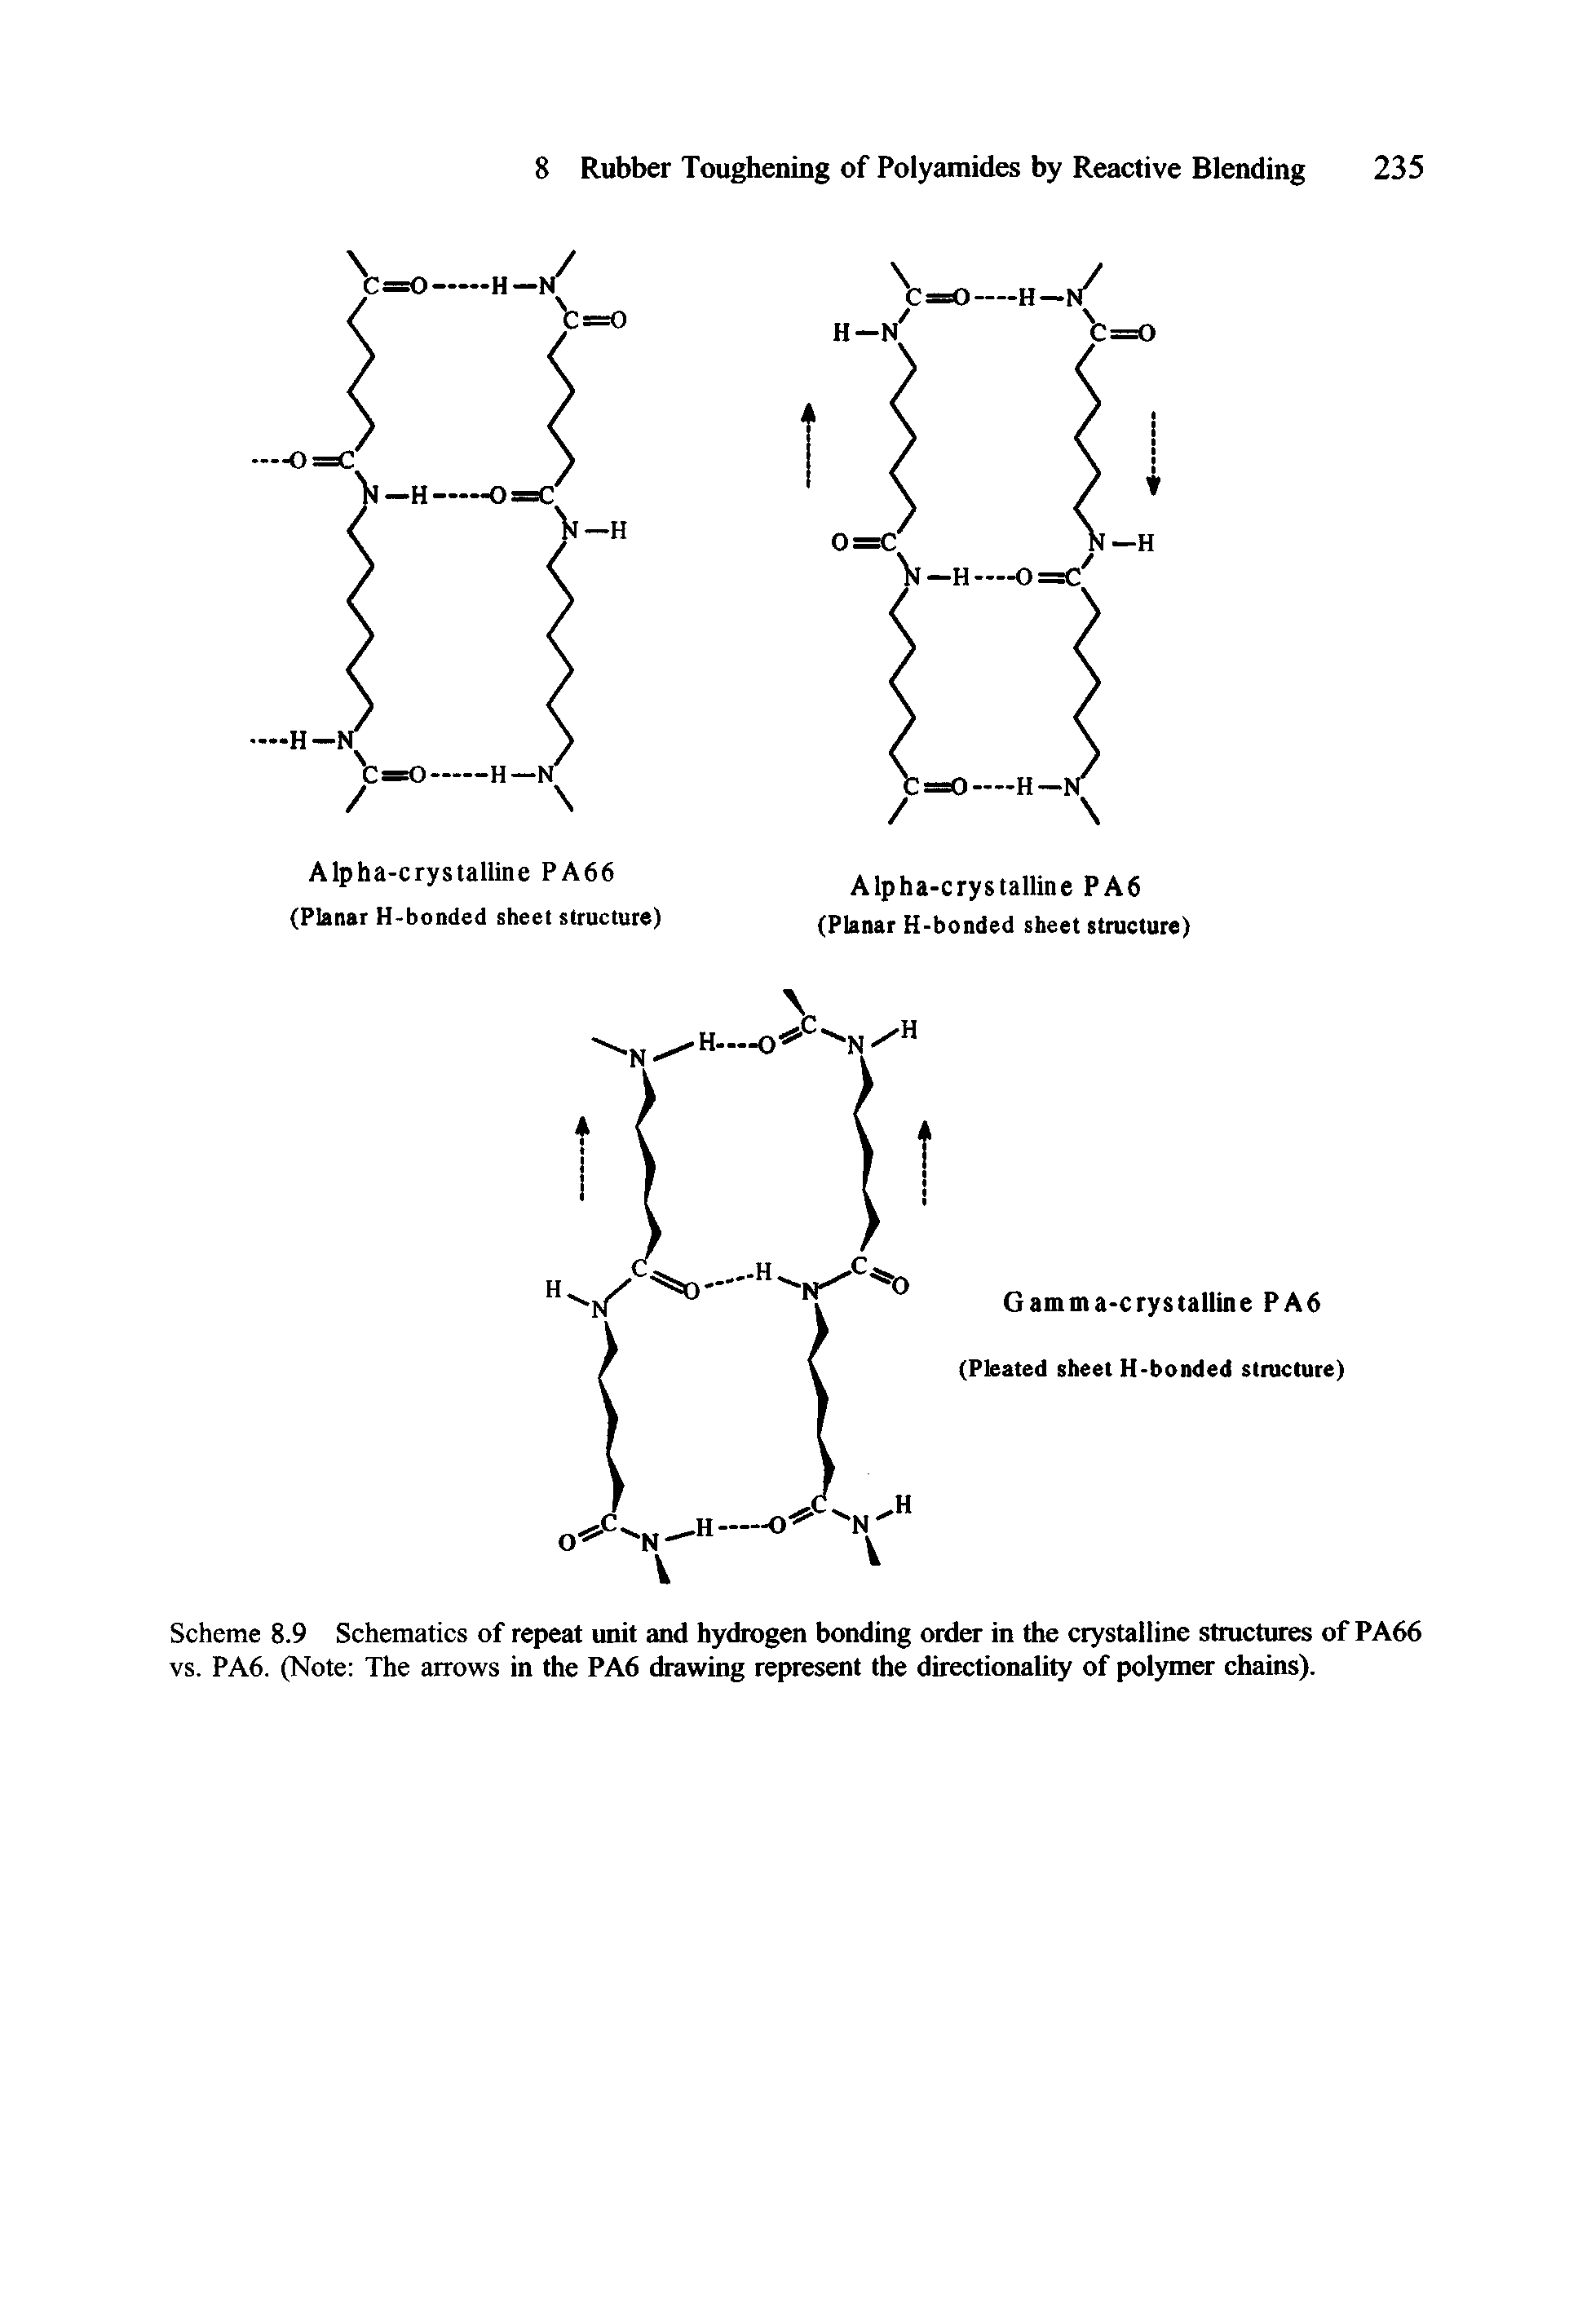 Scheme 8.9 Schematics of repeat unit and hydrogen bonding order in the crystalline structures of PA66 vs. PA6. (Note The arrows in the PA6 drawing represent the directionality of polymer chains).